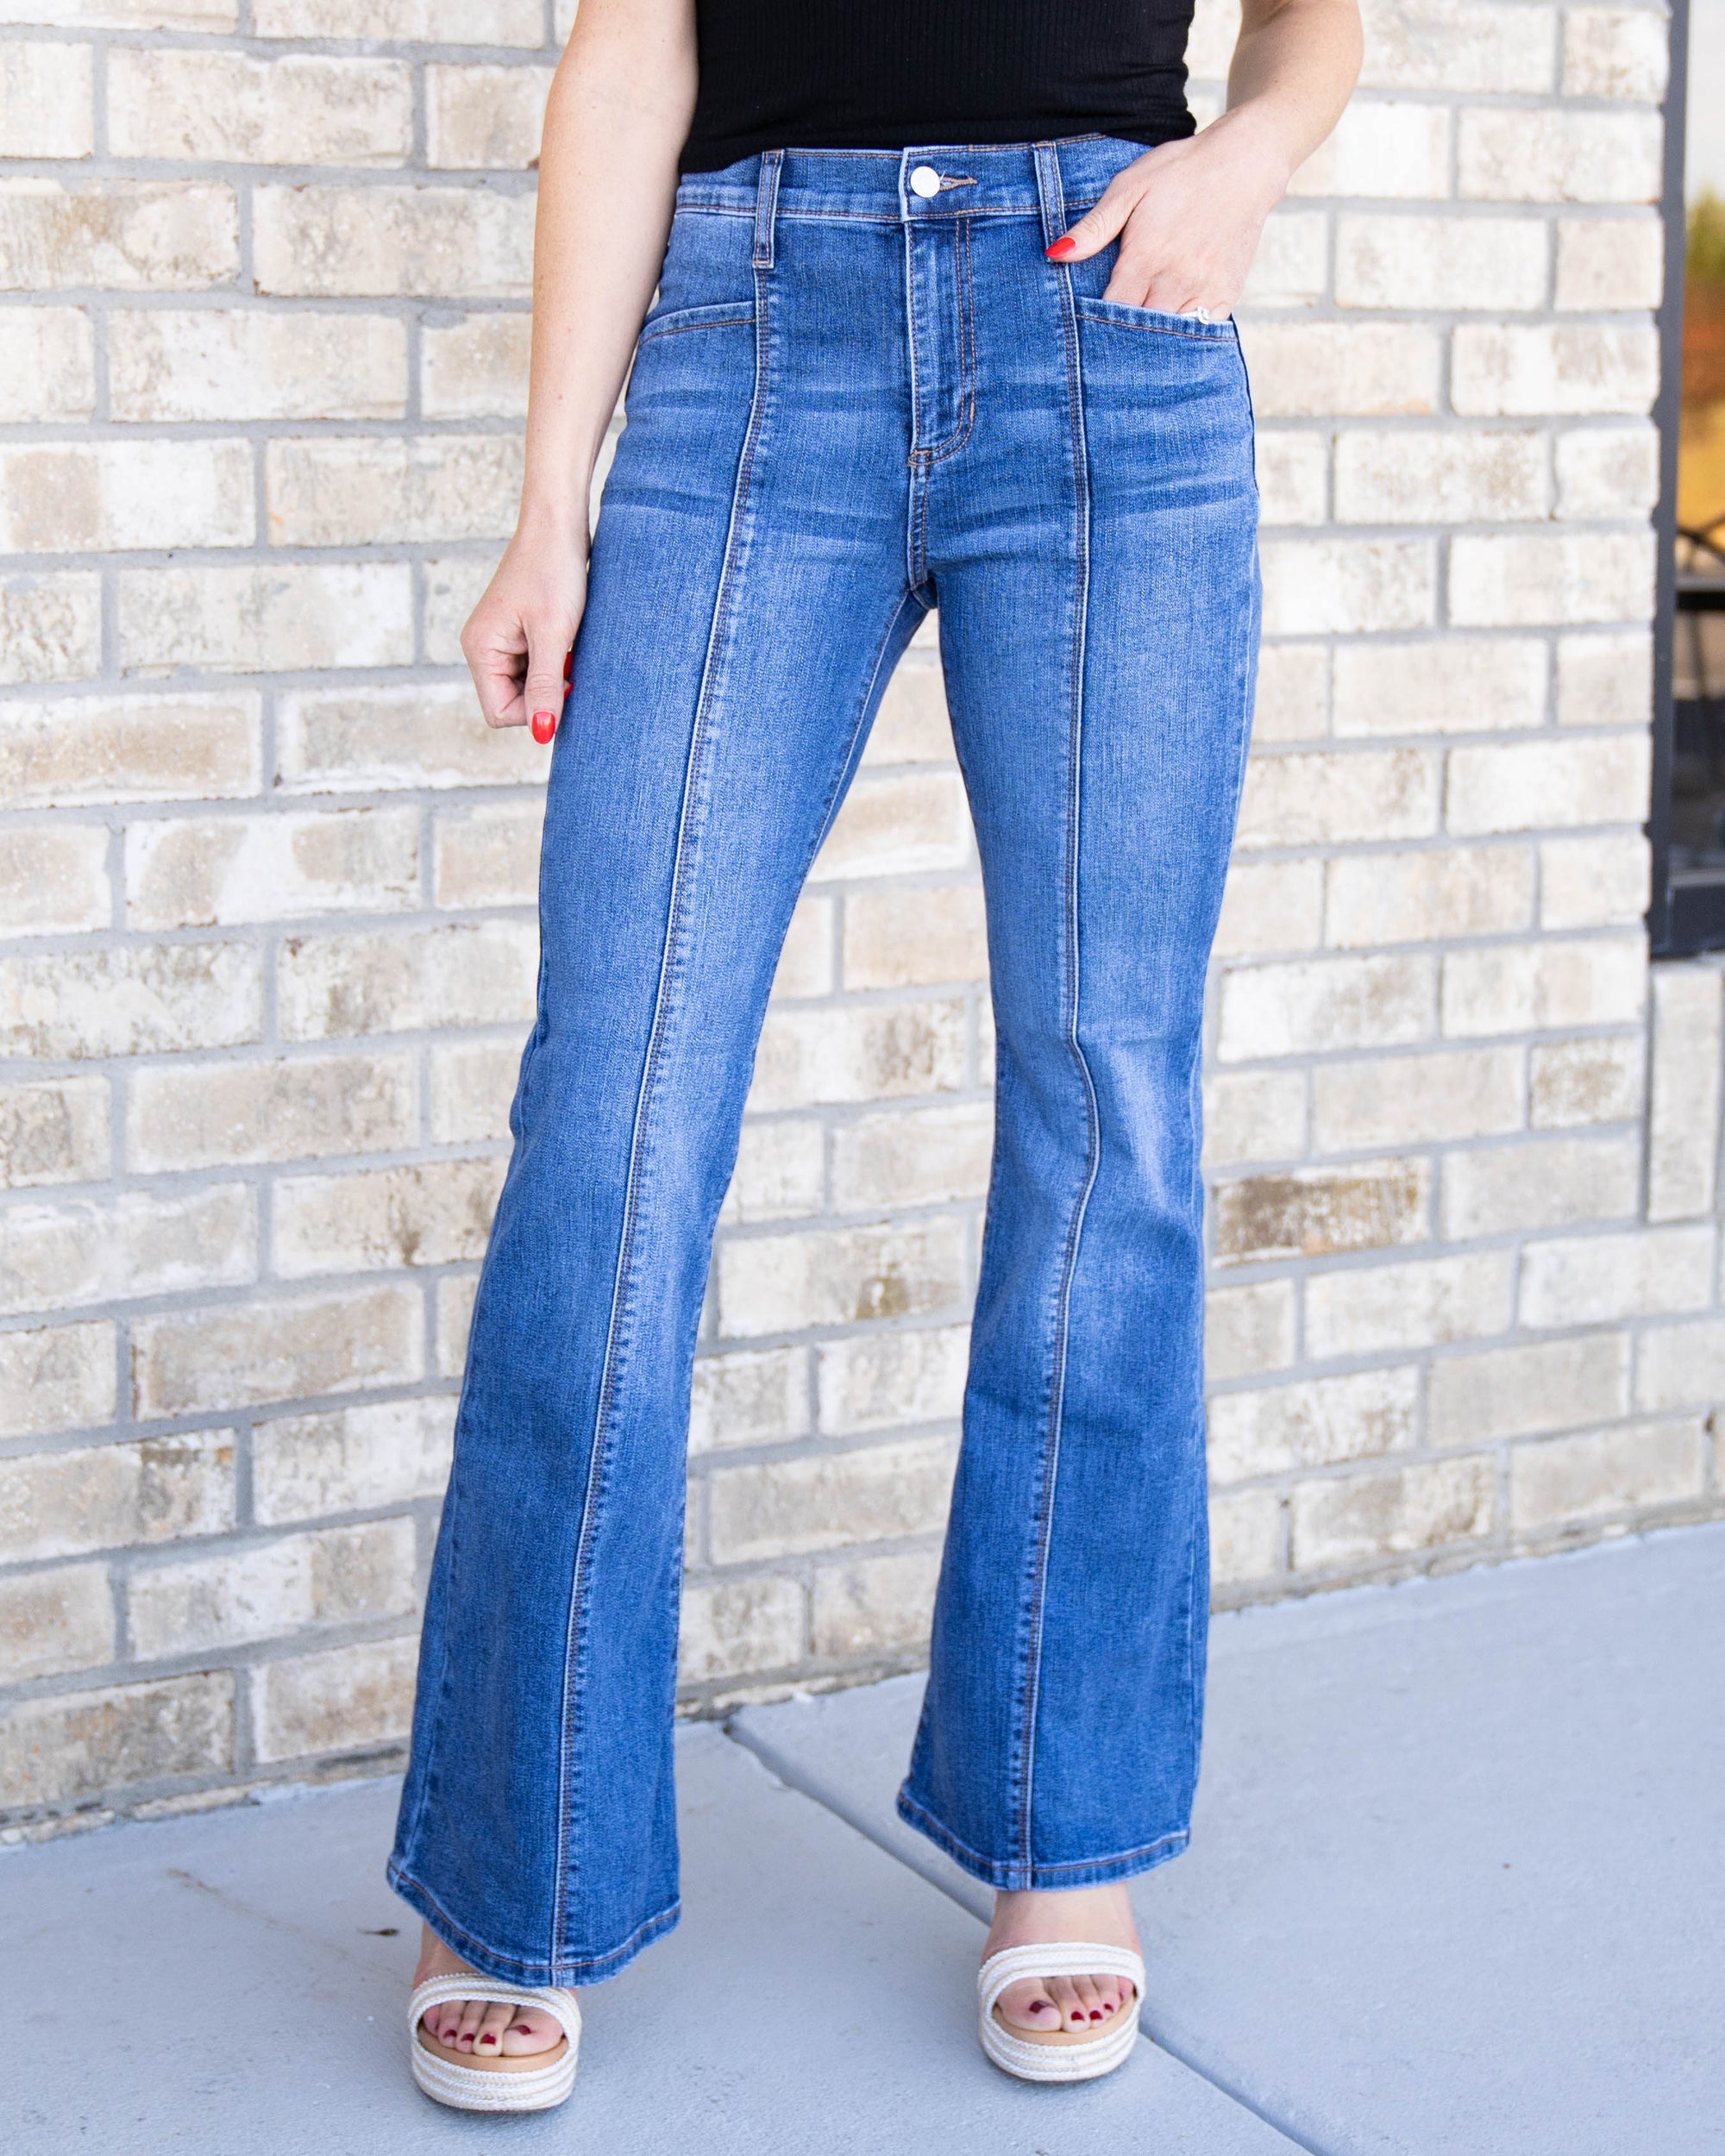 Everly Front Seam Flare Jeans - Medium Wash - Eleven Oaks Boutique